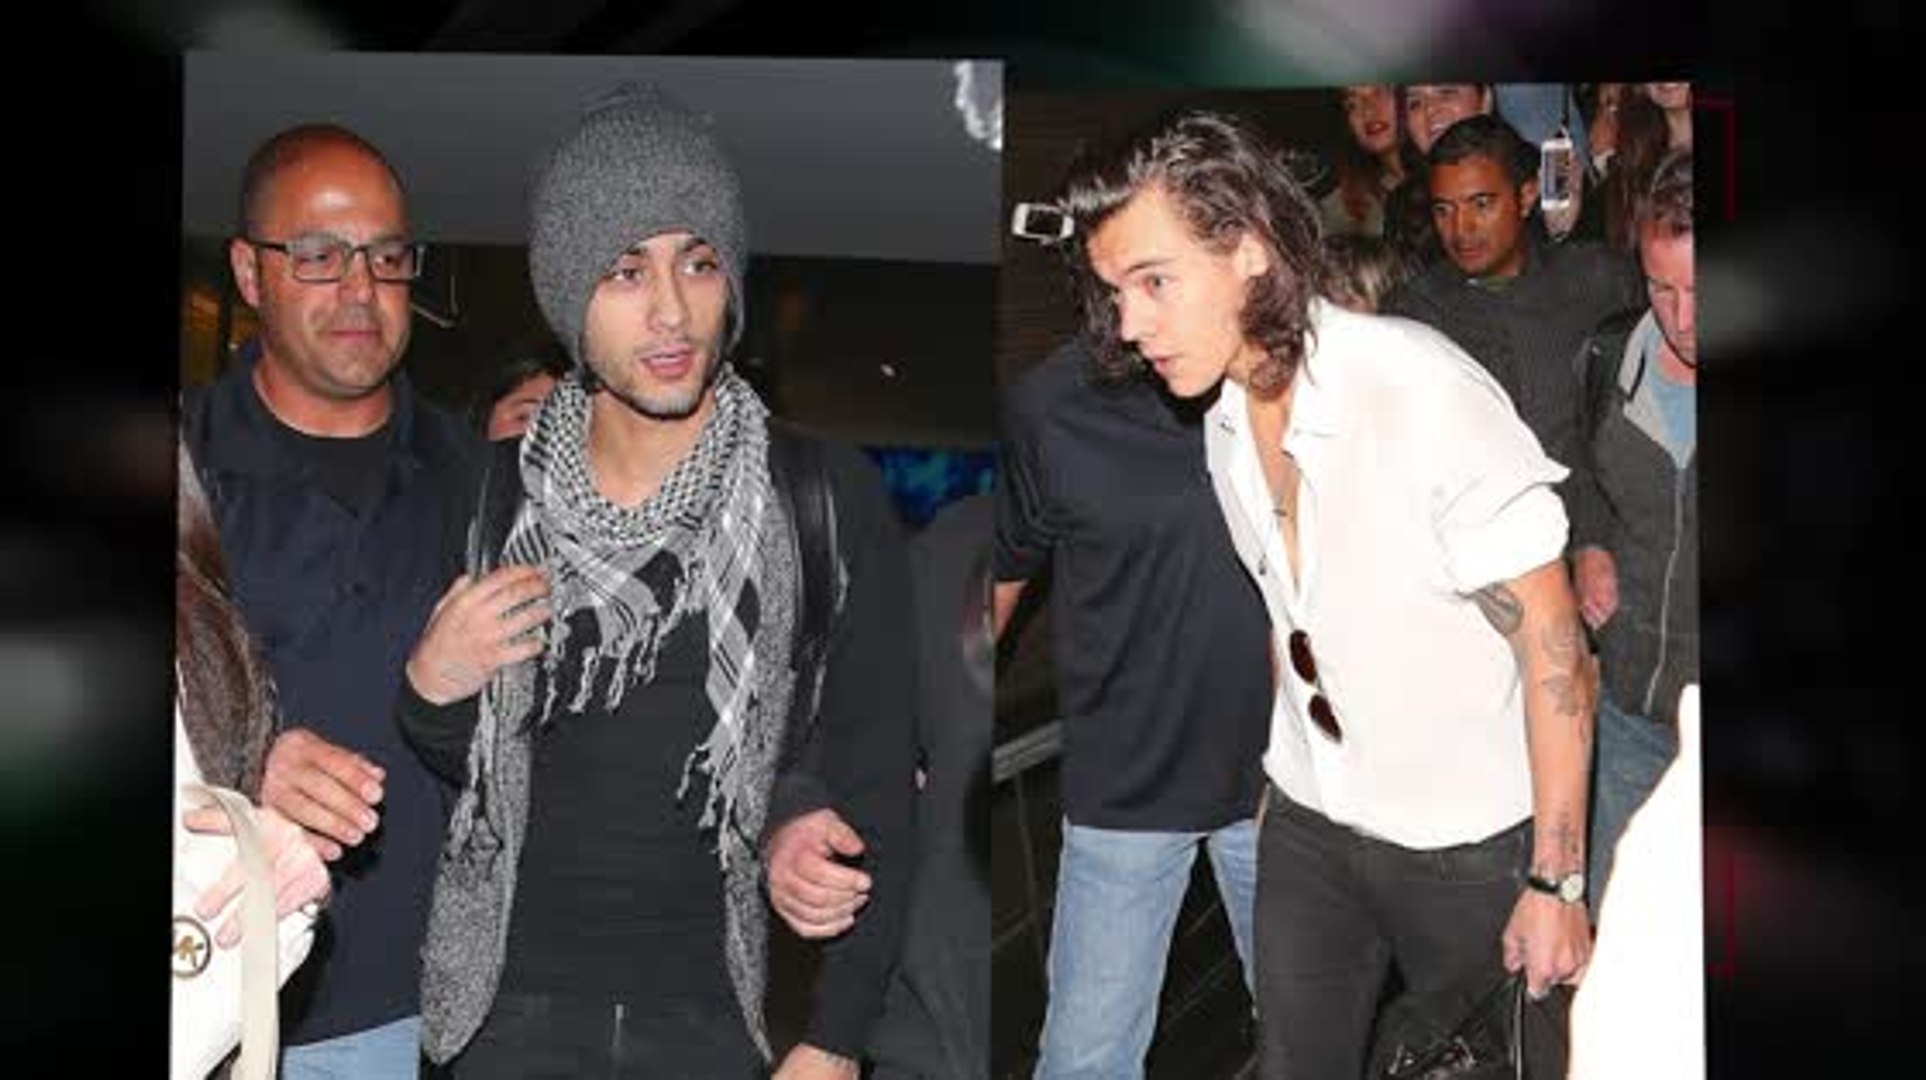 Harry Styles And Zayn Malik Get Mobbed By Fans At LAX